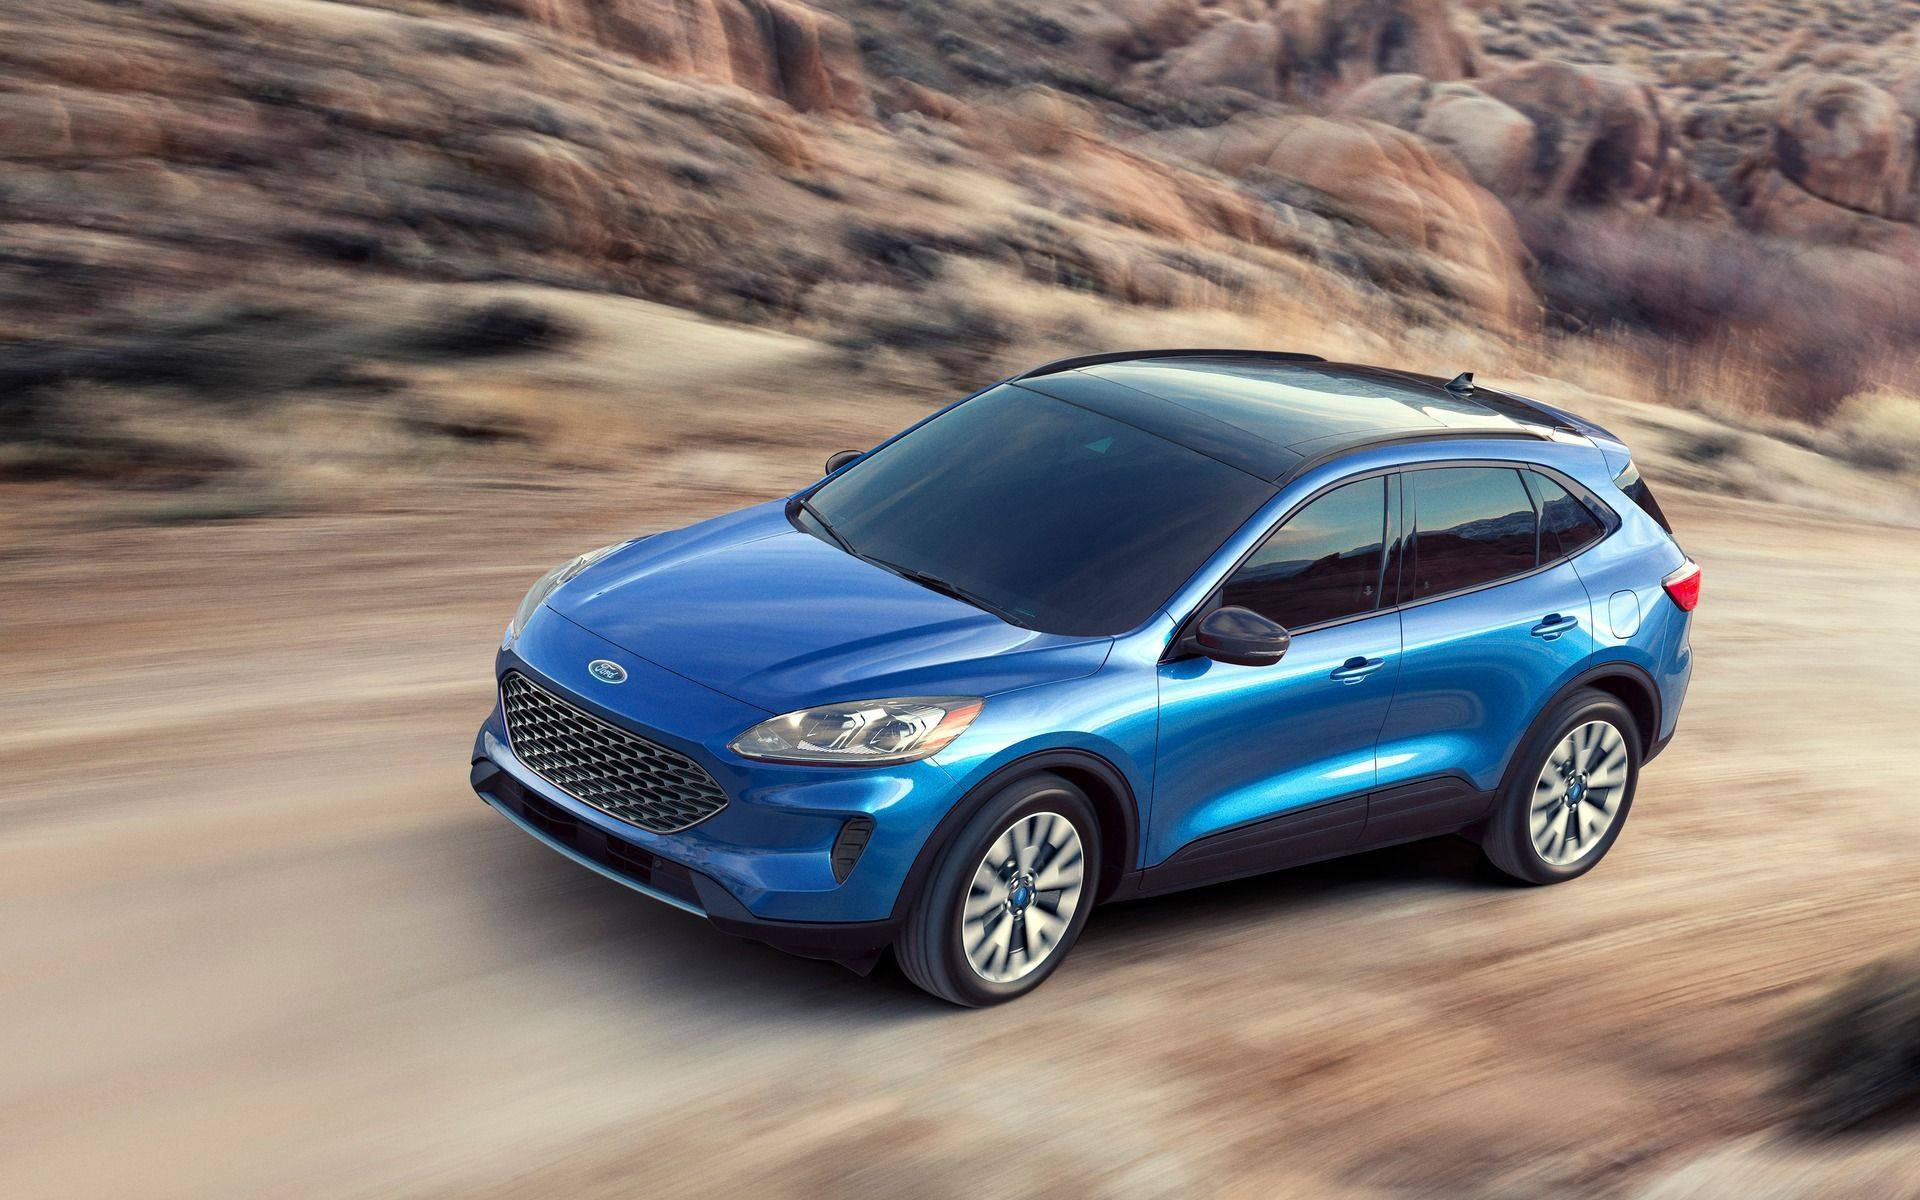 Discovery Ford Sales and Leasing